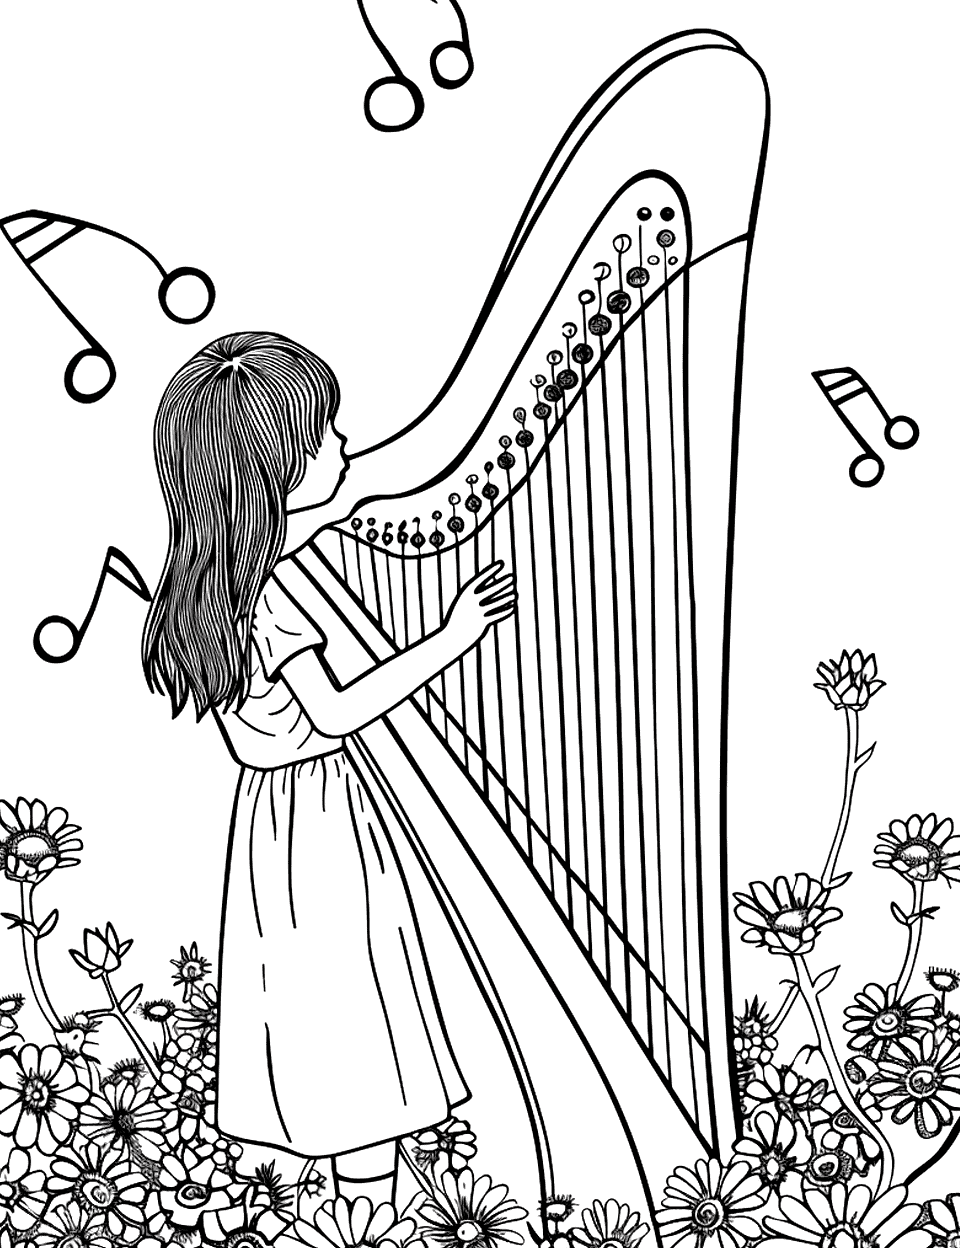 Harp in the Flower Field Music Coloring Page - A young girl playing a harp in a field of wildflowers.